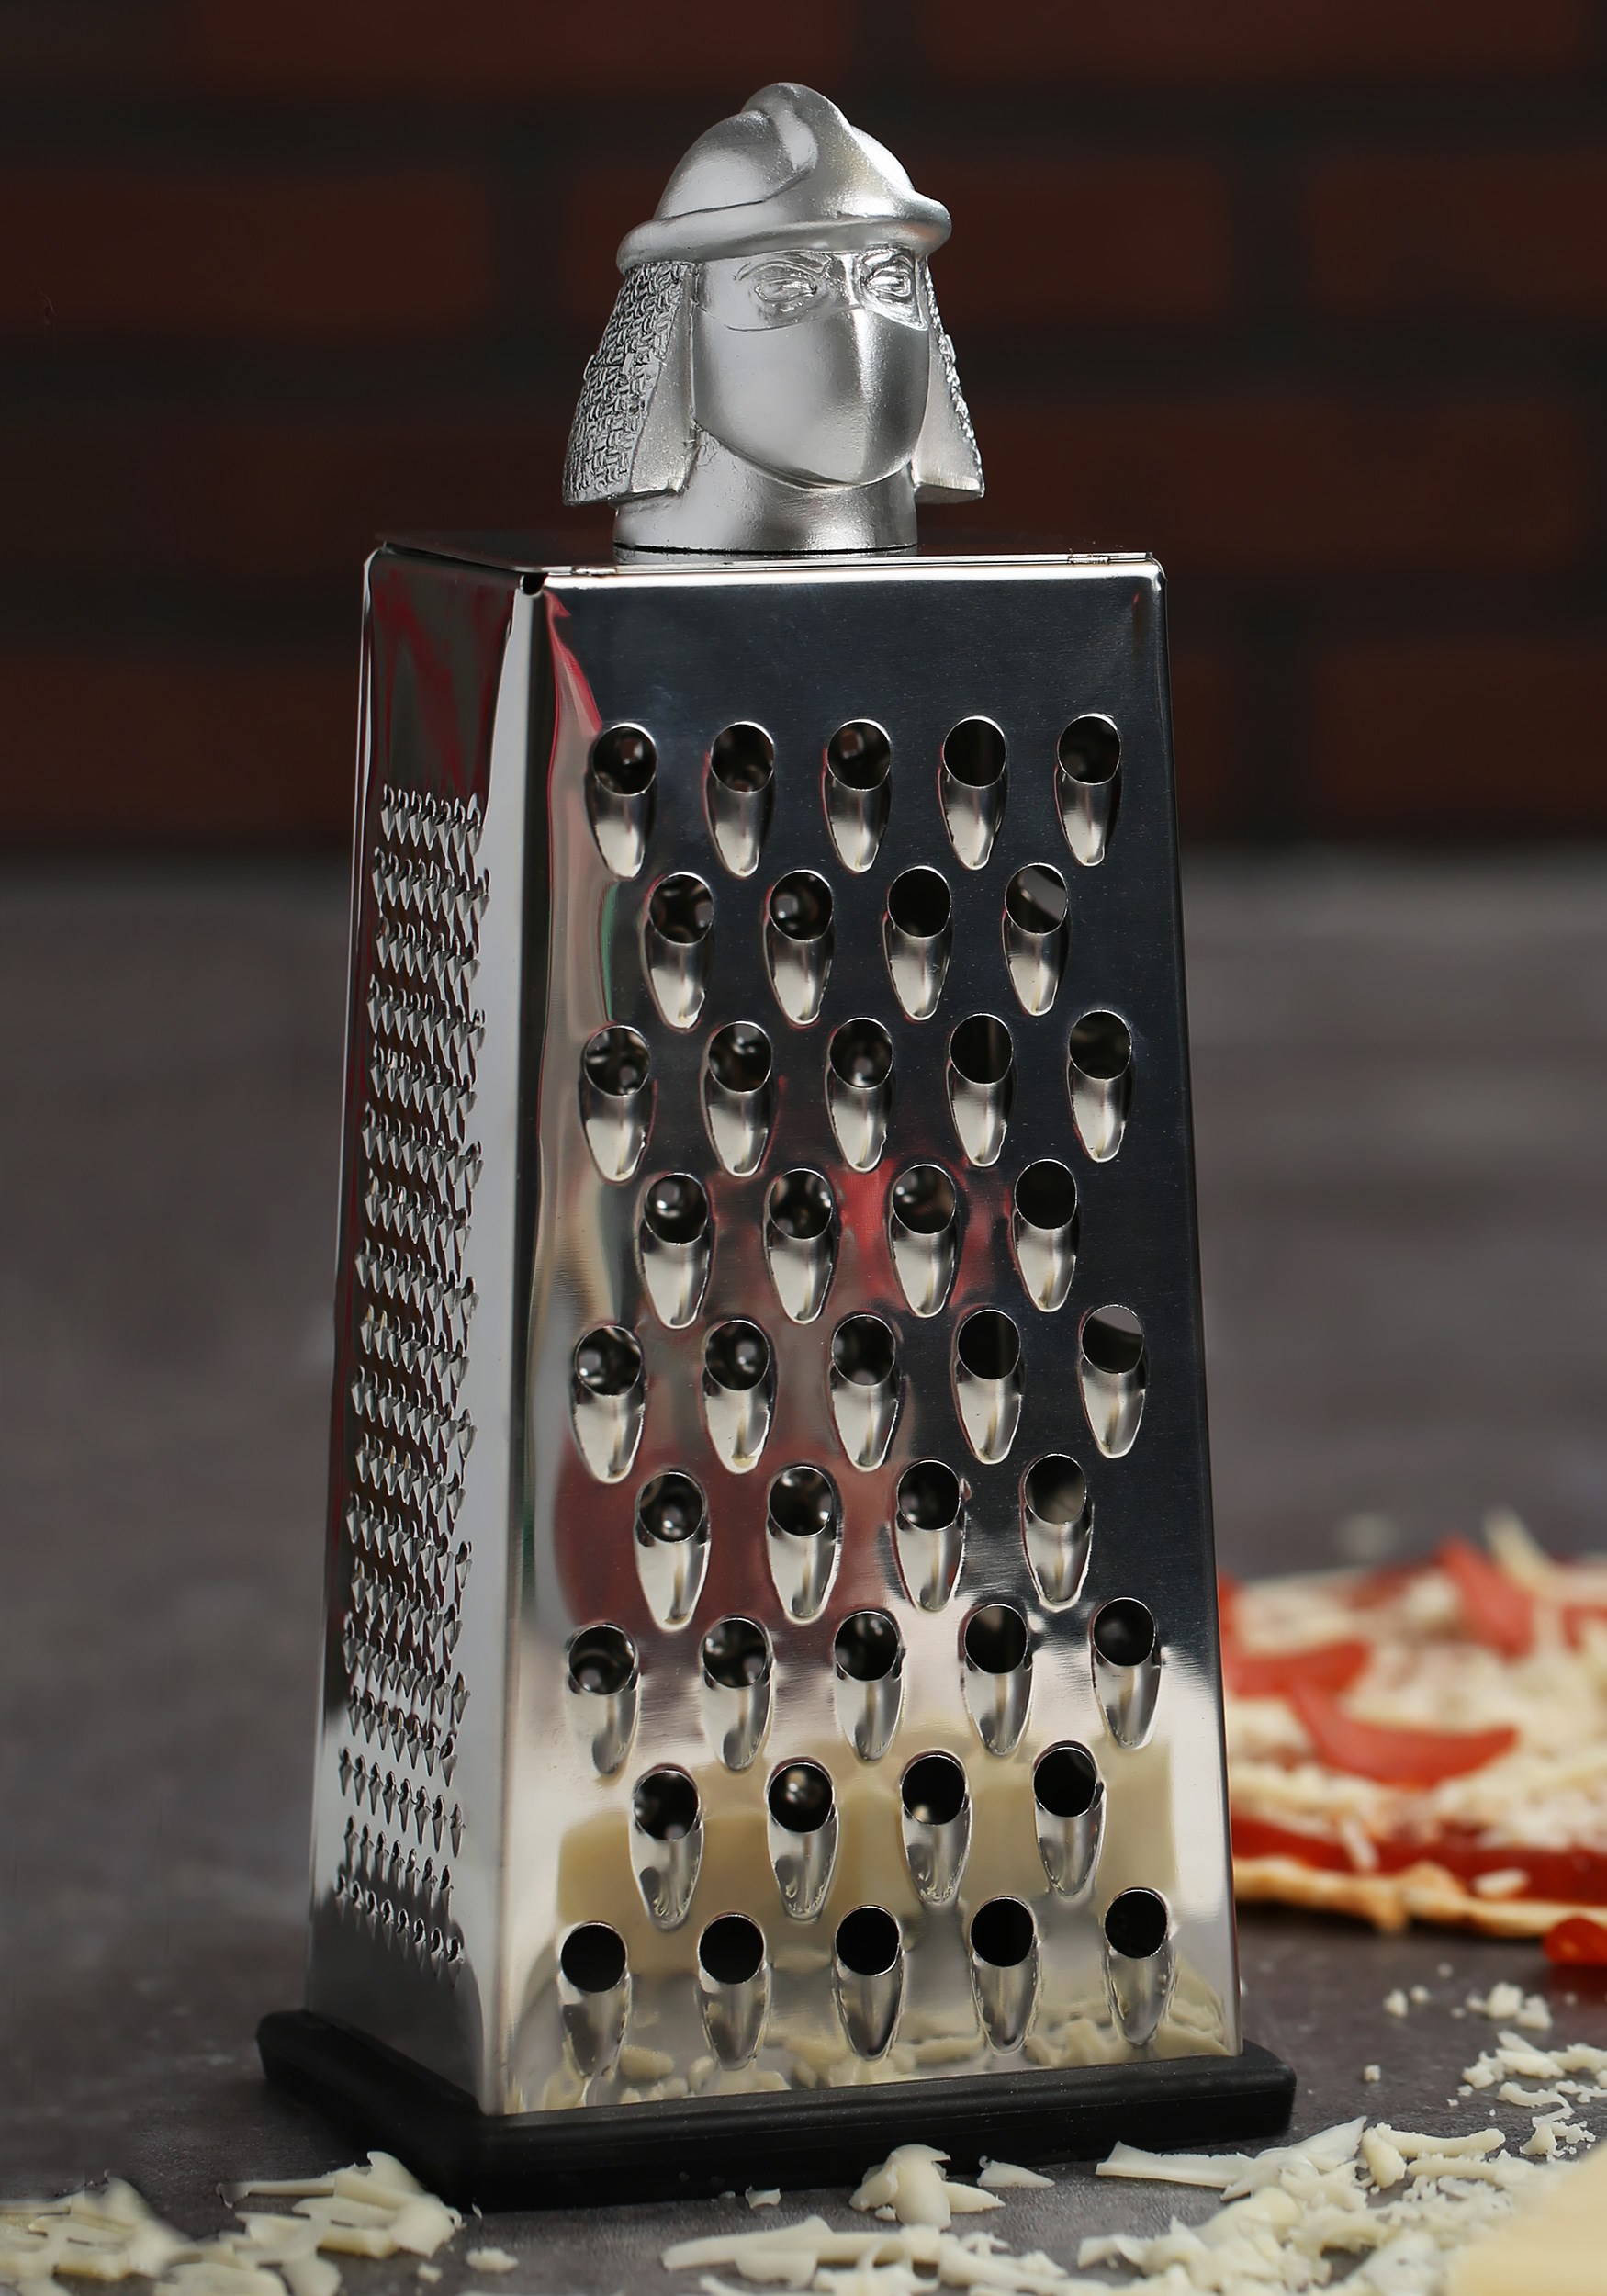 https://images.fun.com/products/56763/1-1/tmnt-shredder-cheese-grater-new-main.jpg